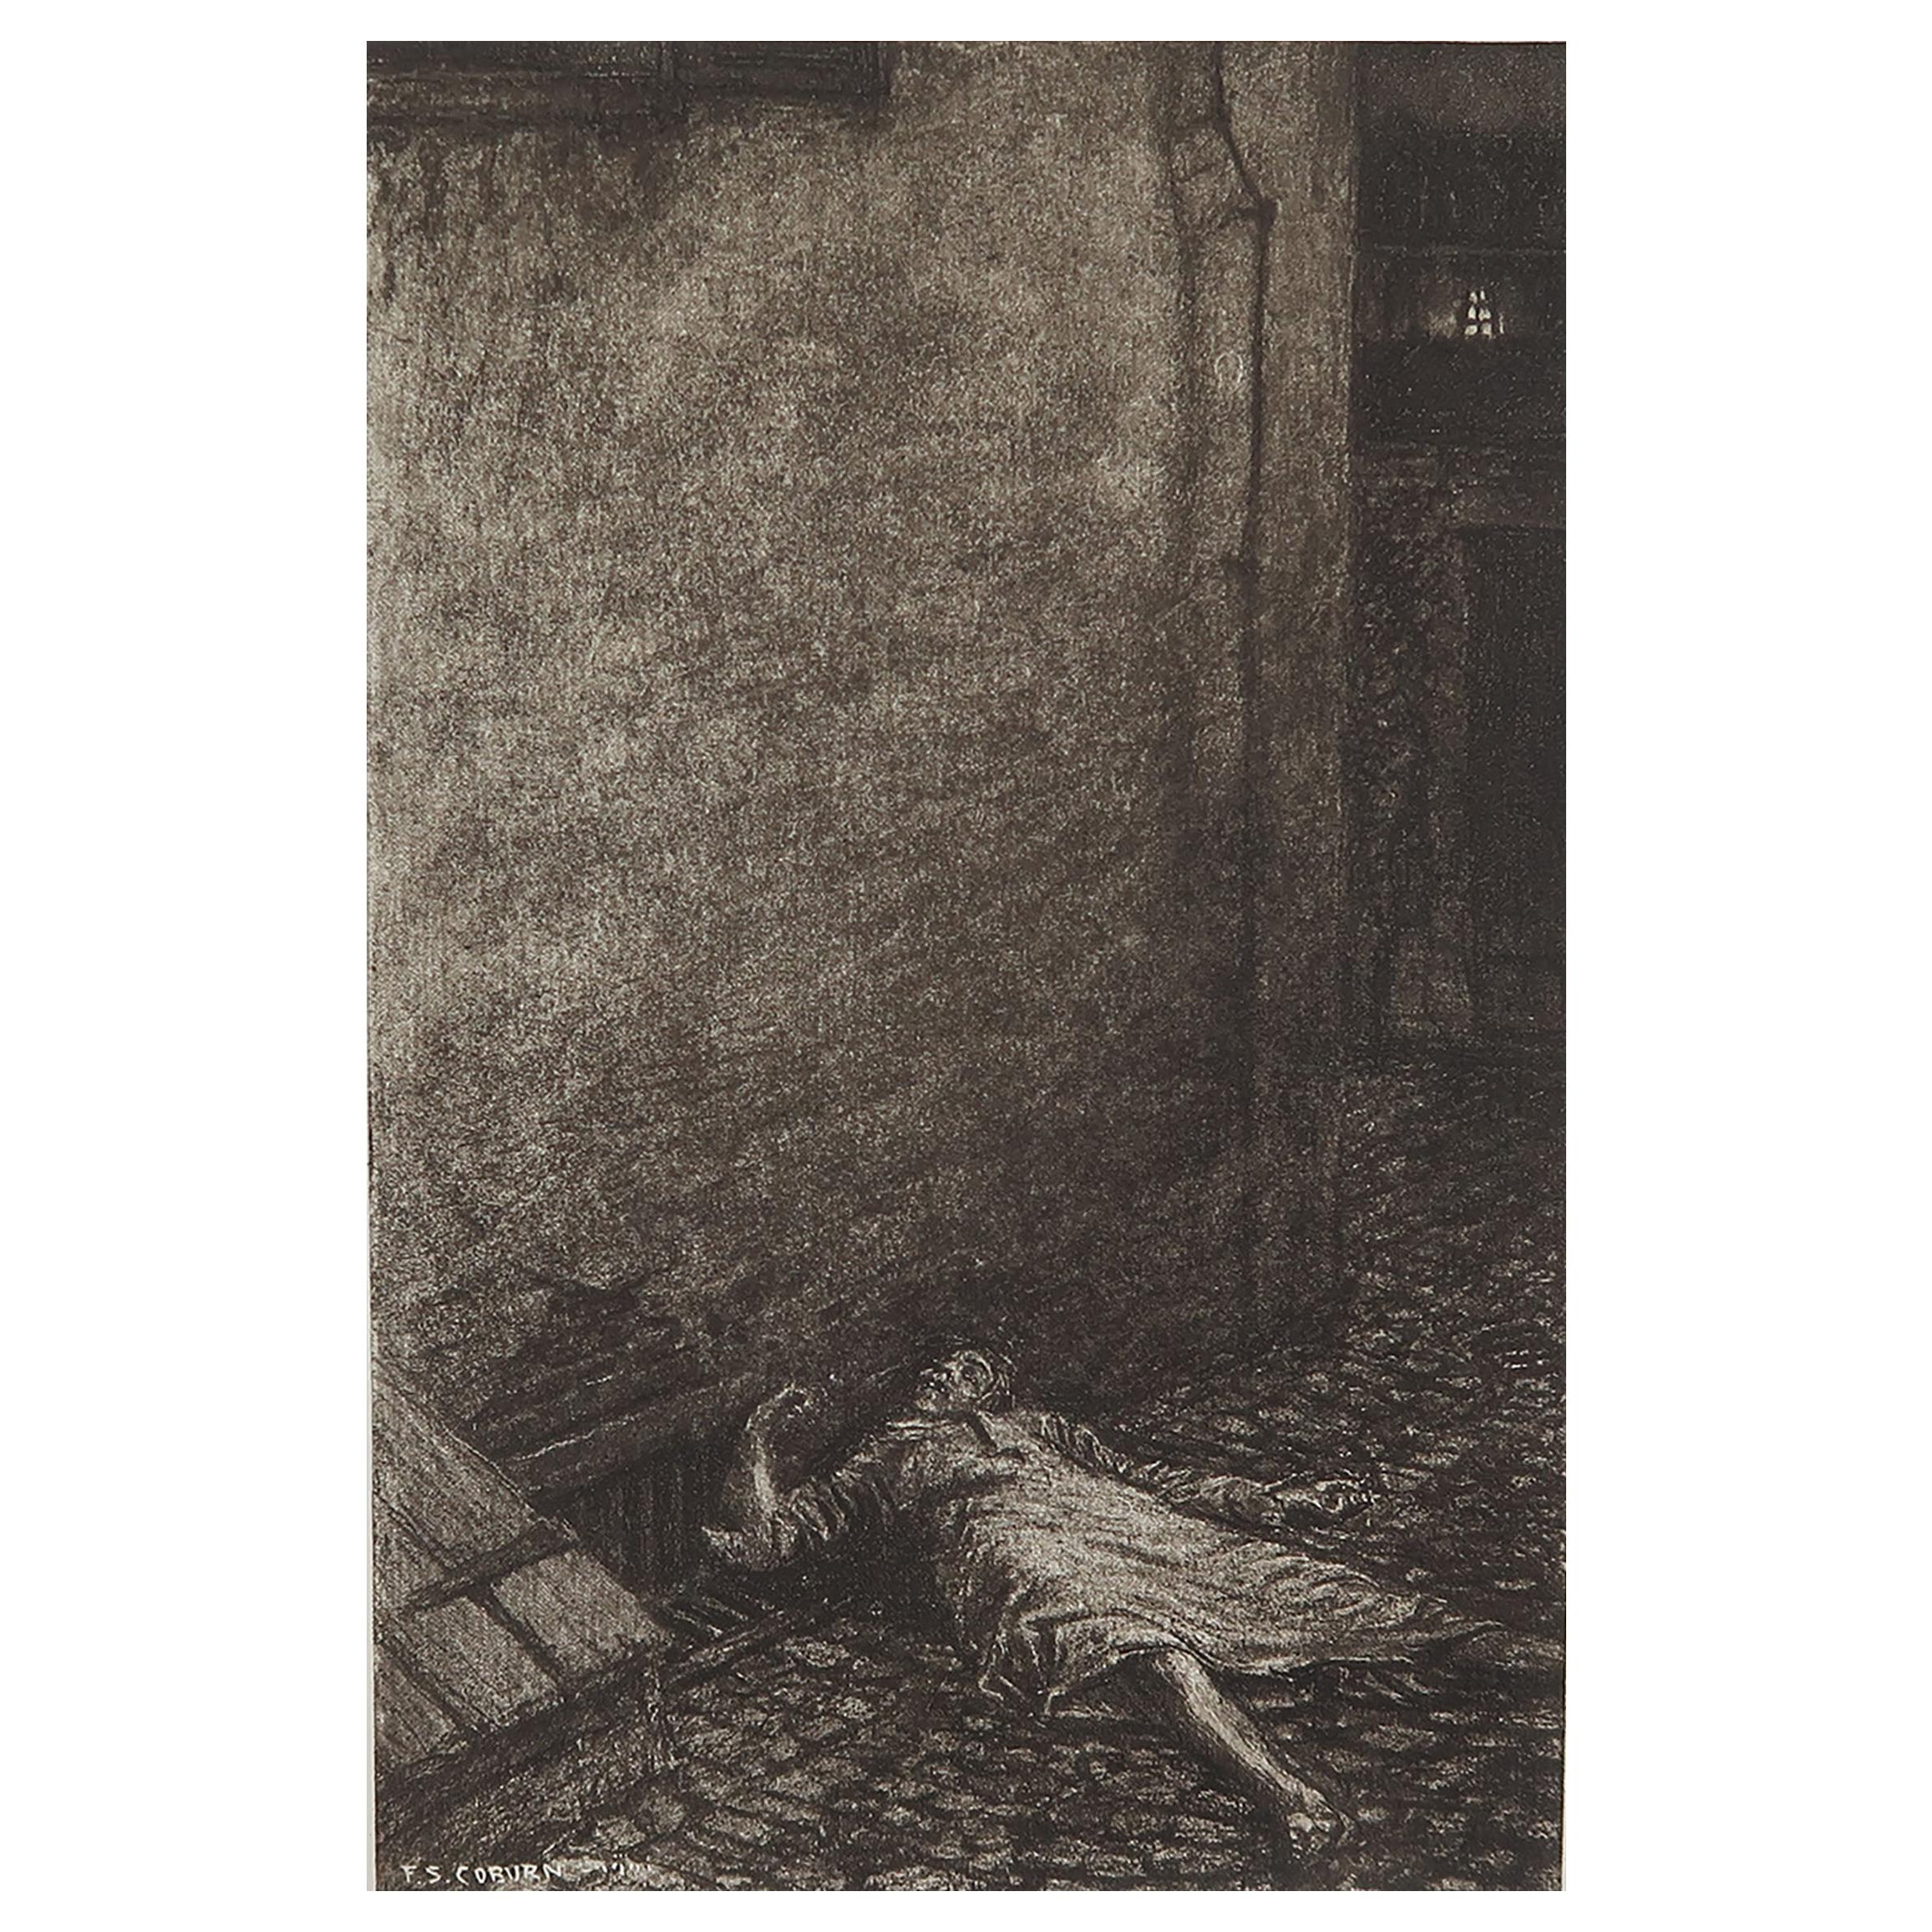 Original Limited Edition Print by Frederick S.Coburn-Murders in Rue Morgue, 1902